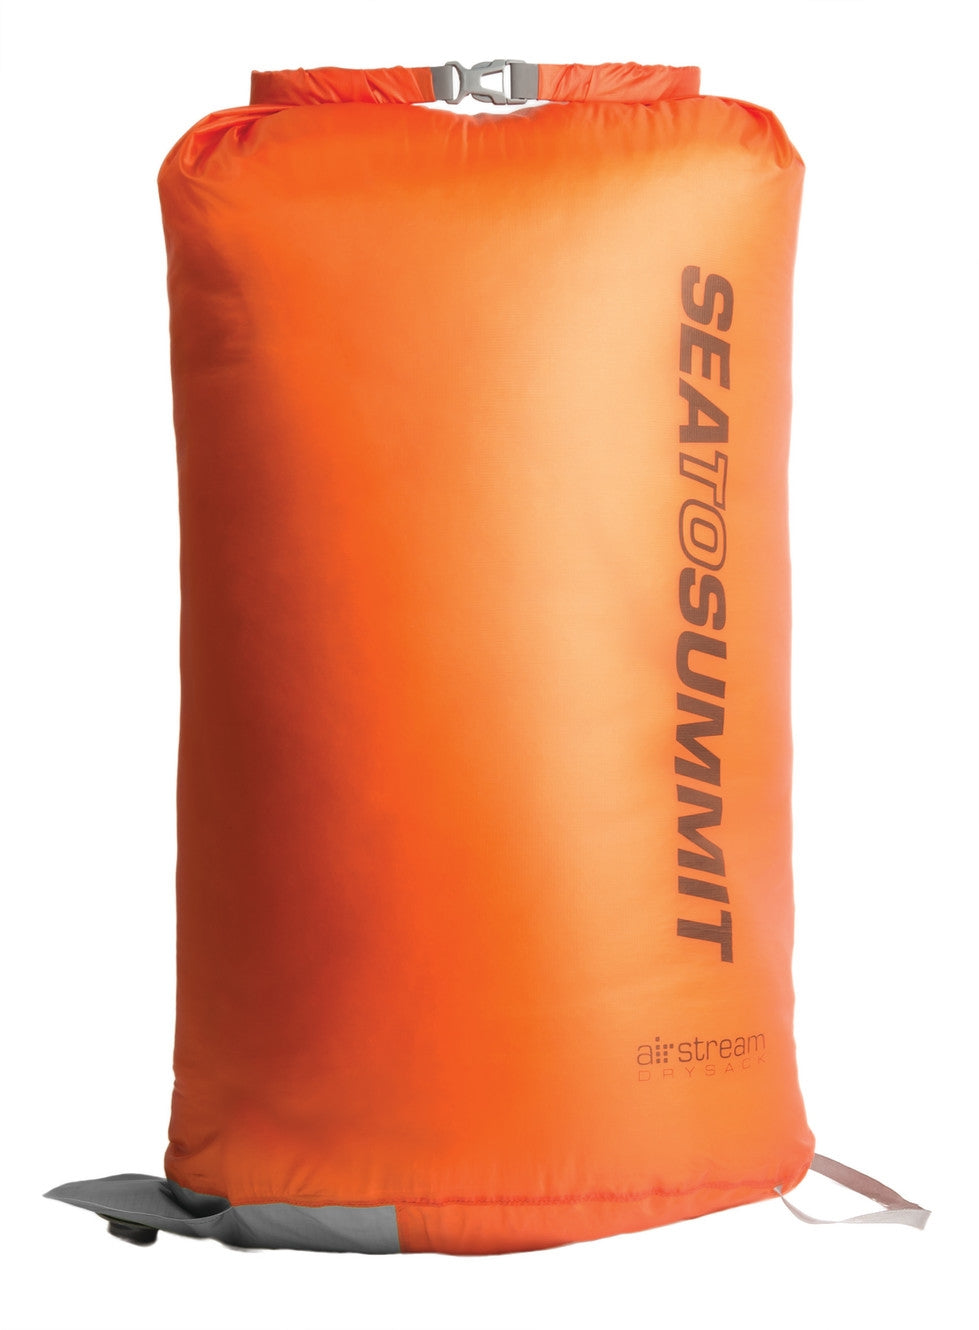 Sea to Summit Air Stream Dry Bag And Pump Sack - 20L